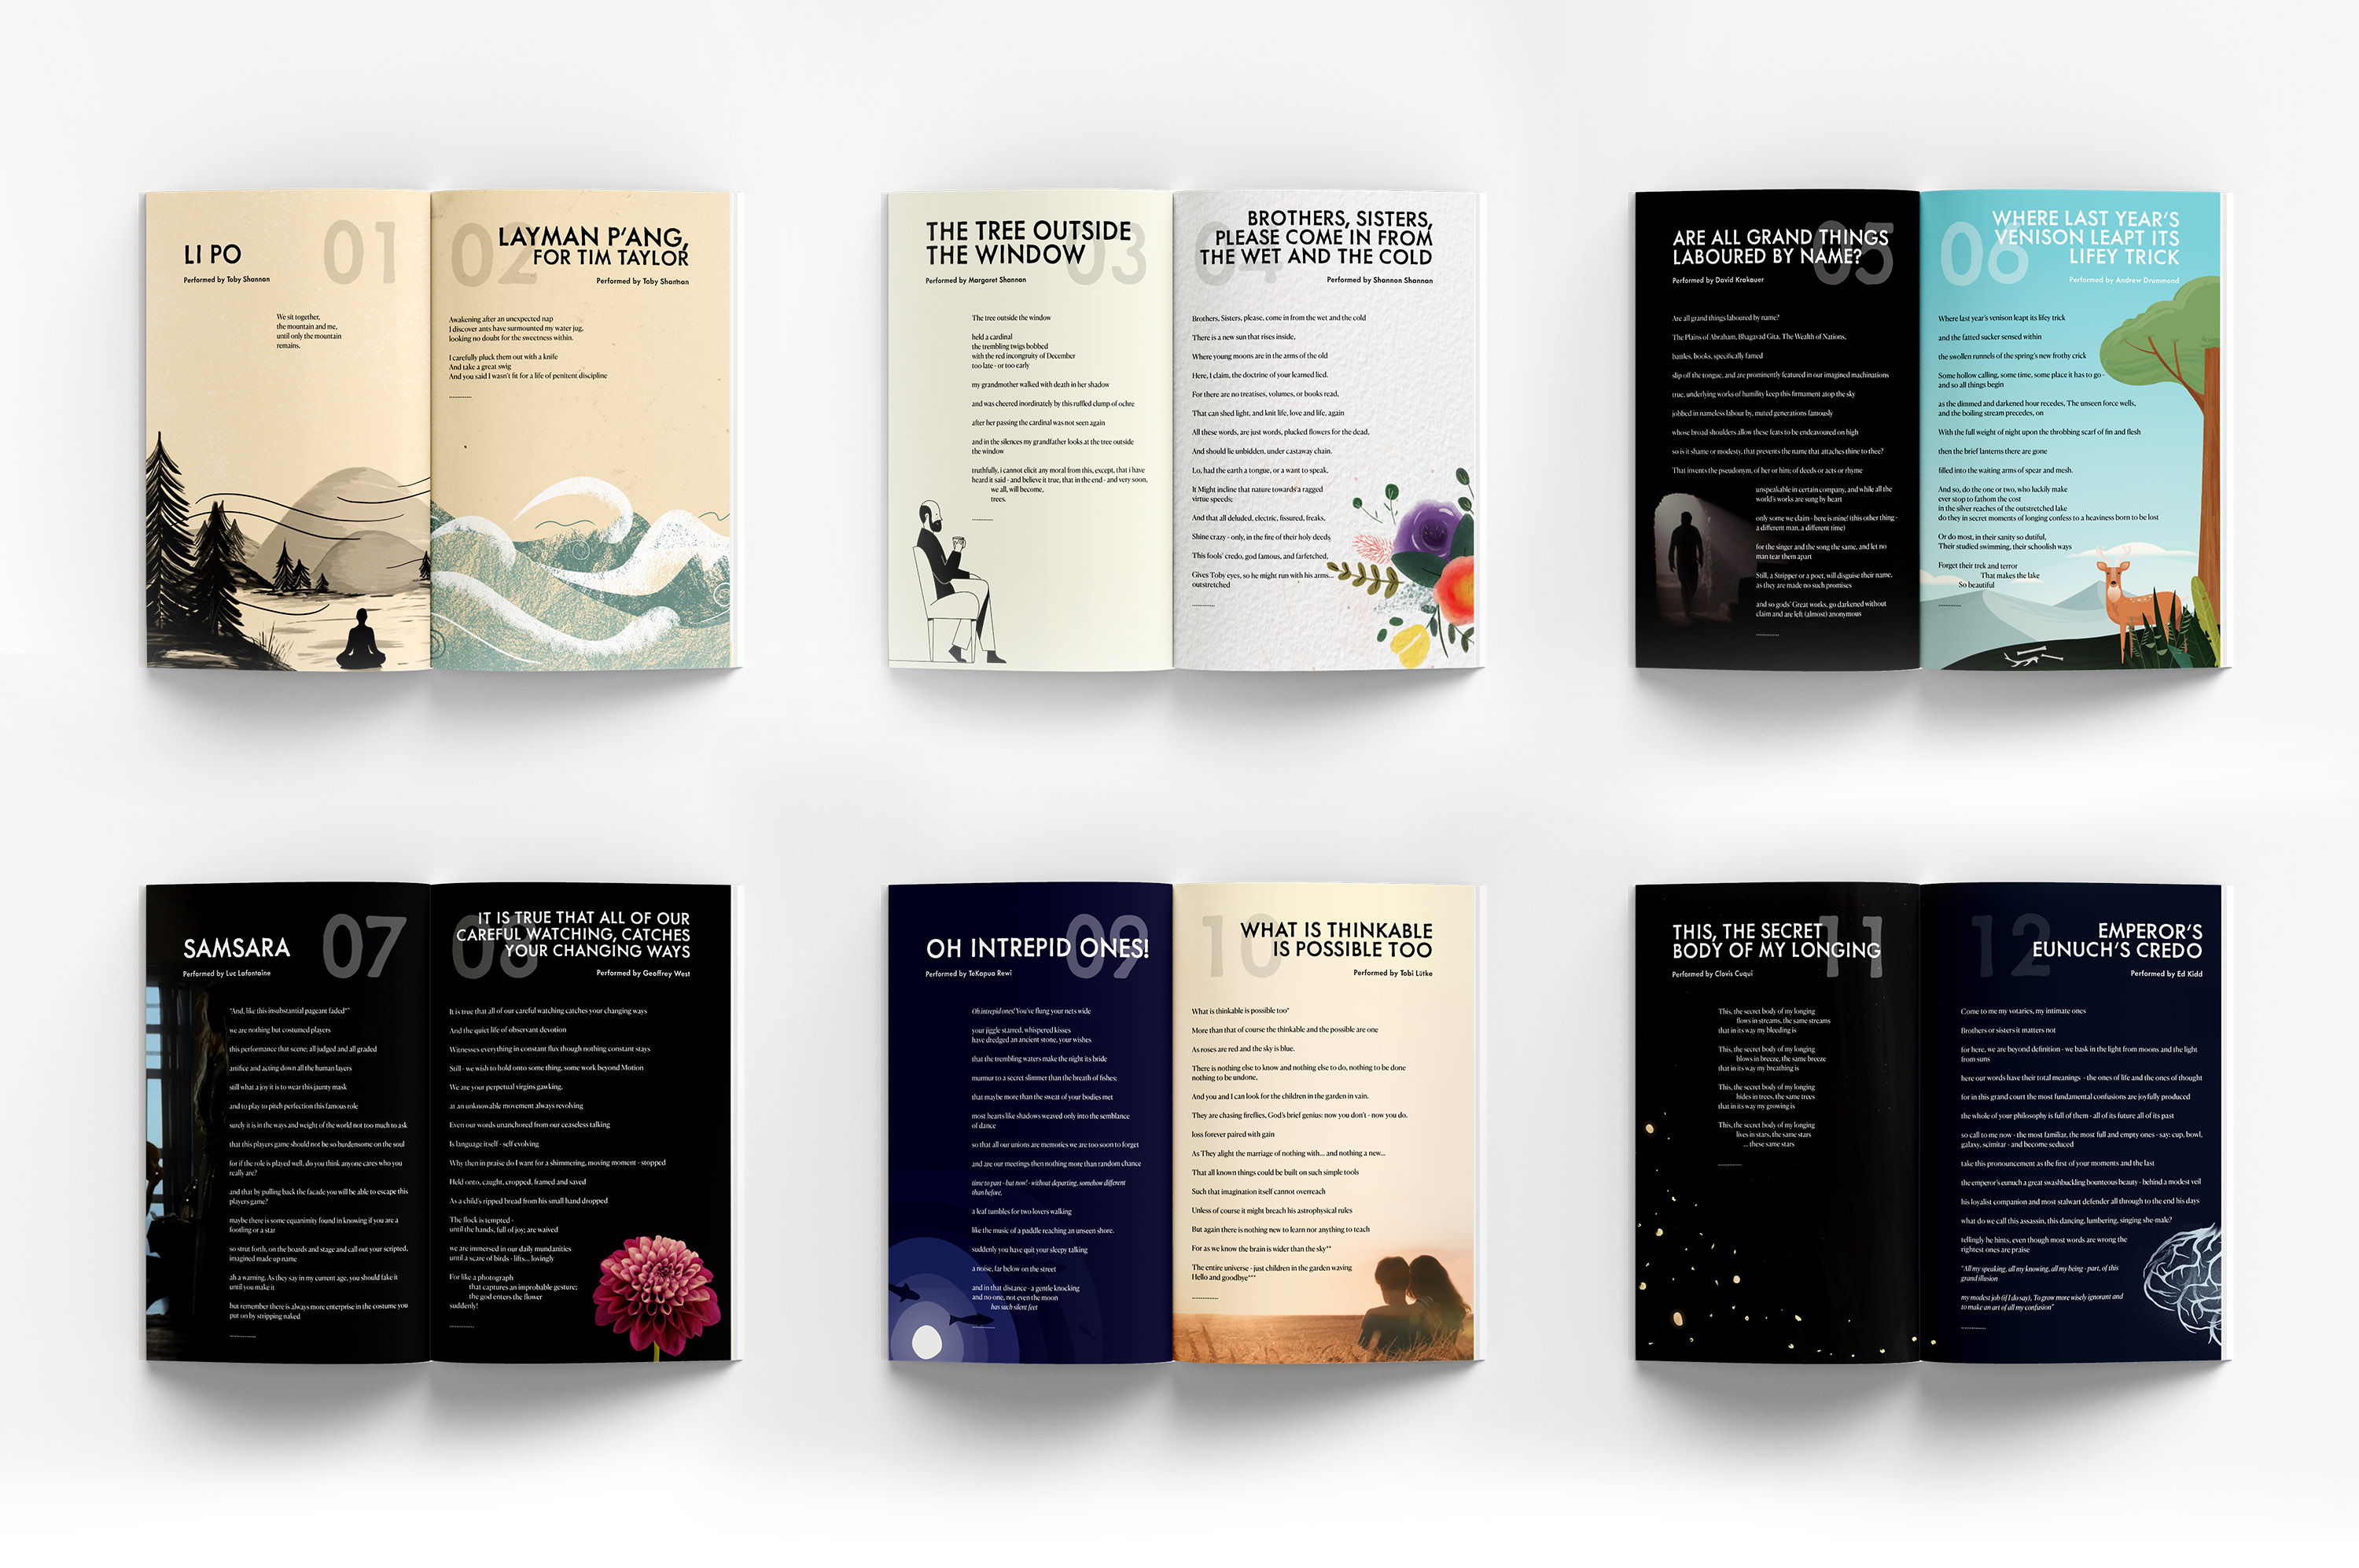 A collection of the pages in the playbill, each completed with the sonnet itself and a creative background to represent the video.